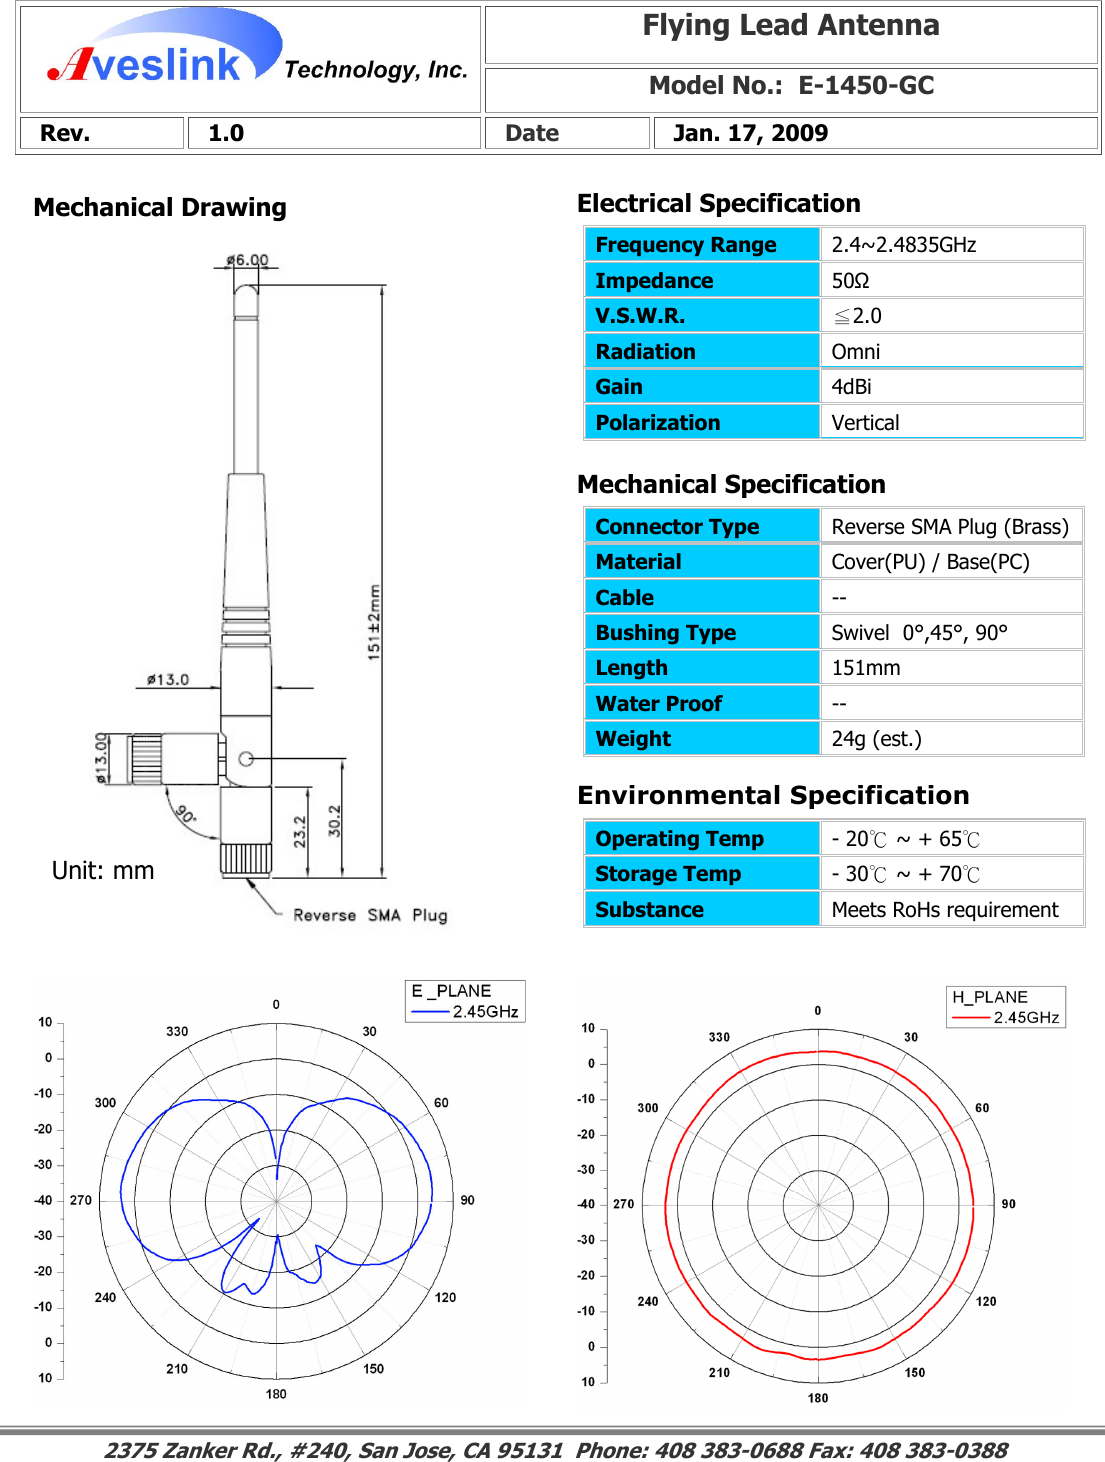 Mechanical DrawingMechanical Specification Environmental SpecificationFlying Lead Antenna Model No.:  E-1450-GC  Rev.   1.0   Date   Jan. 17, 2009 Connector Type   Reverse SMA Plug (Brass)Material  Cover(PU) / Base(PC) Cable  -- Bushing Type  Swivel  0°,45°, 90° Length  151mm Water Proof  -- Weight  24g (est.)                                                                                                                                                                                                                        2375 Zanker Rd., #240, San Jose, CA 95131  Phone: 408 383-0688 Fax: 408 383-0388 Operating Temp  - 20℃ ~ + 65℃ Storage Temp  - 30℃ ~ + 70℃ Substance  Meets RoHs requirement Electrical SpecificationFrequency Range   2.4~2.4835GHz Impedance  50Ω V.S.W.R.  ≦2.0 Radiation  Omni Gain  4dBi Polarization  Vertical Unit: mm 